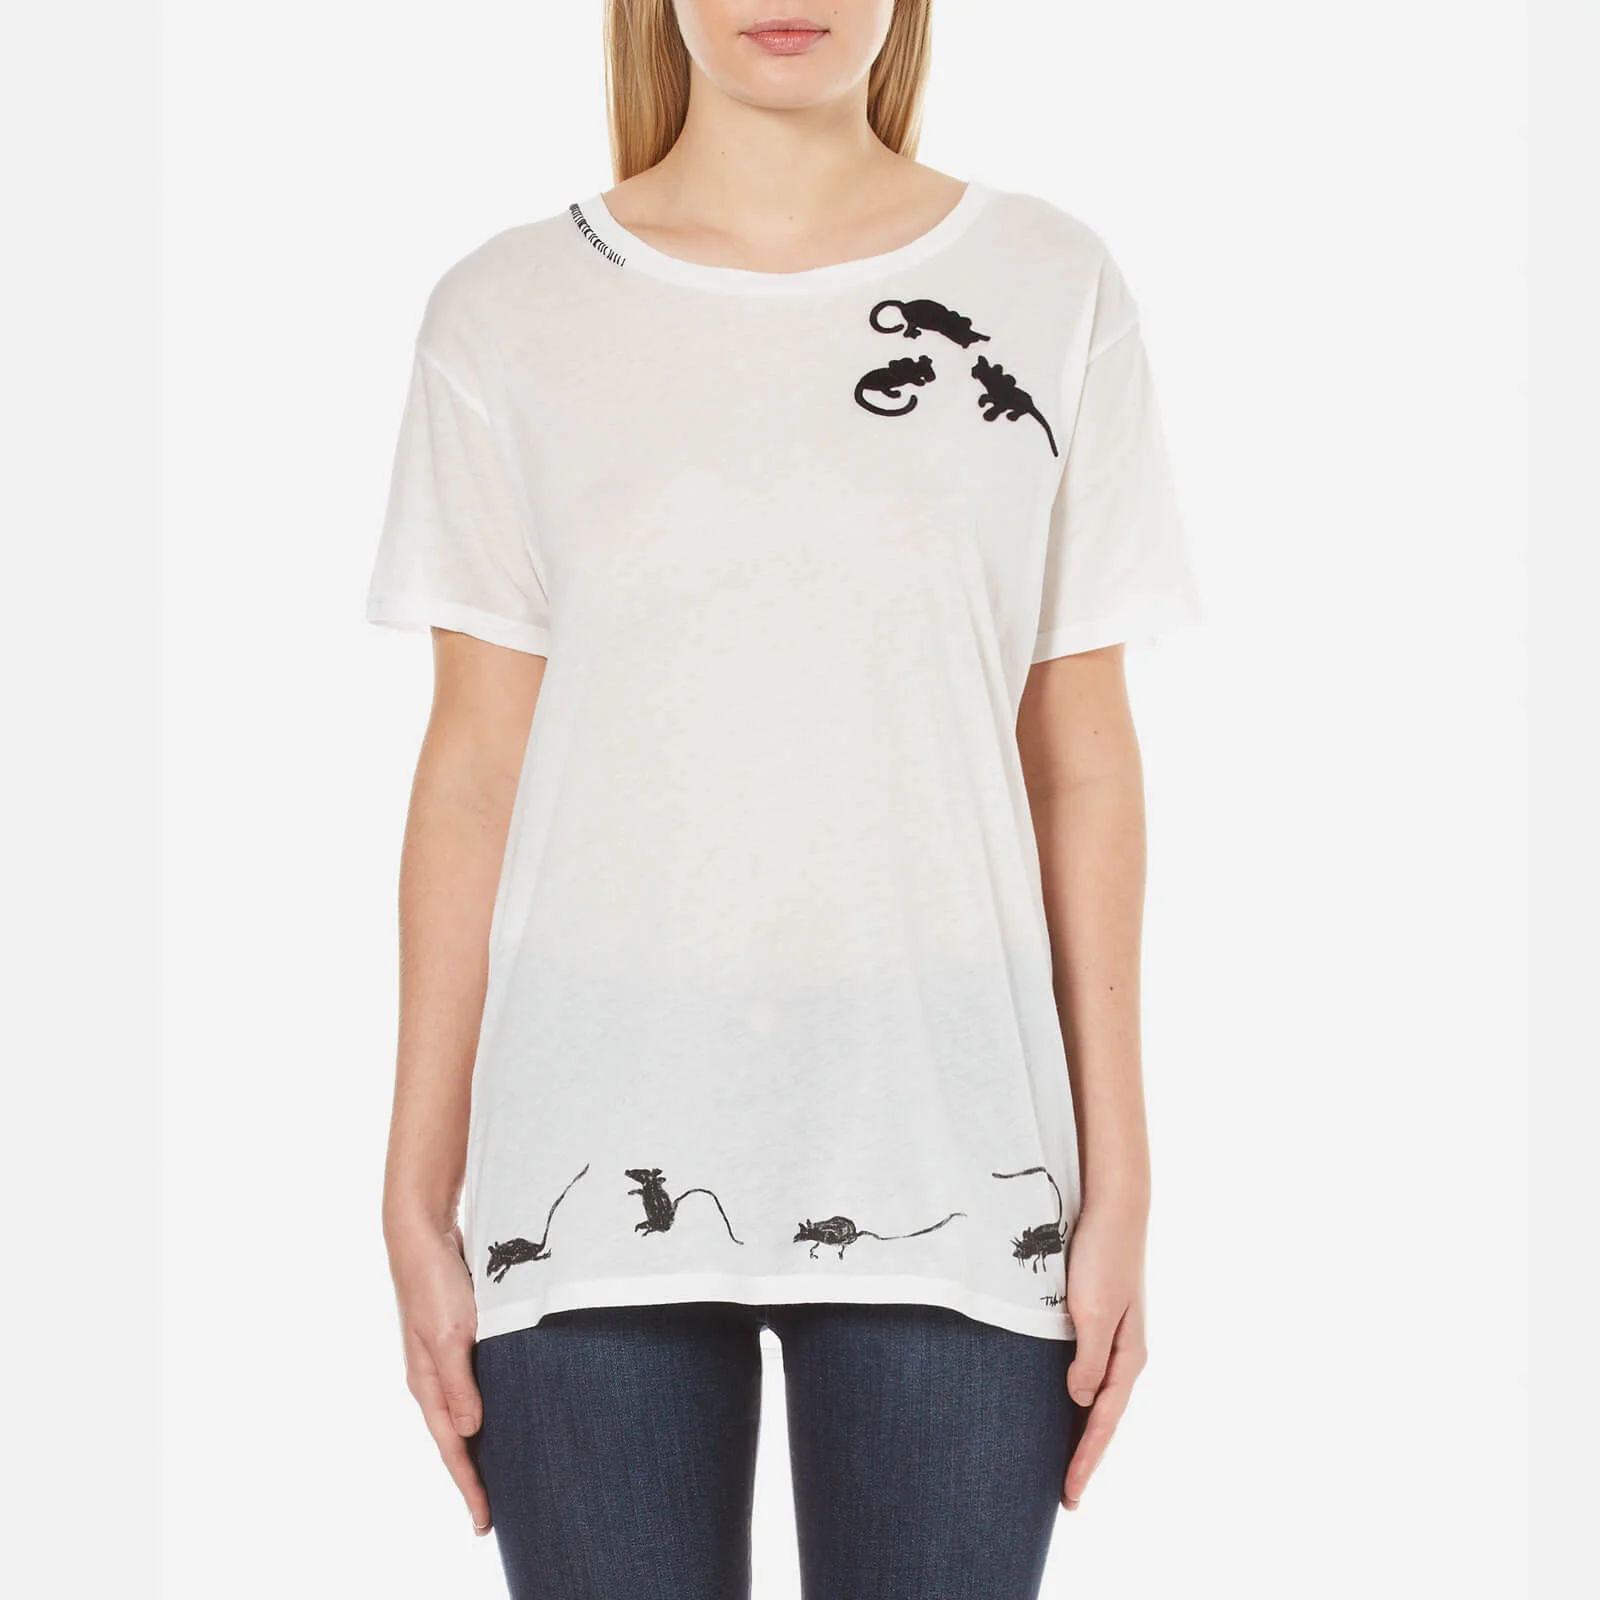 Marc Jacobs Women's Skater T-Shirt with Mice Emblem - White Image 1